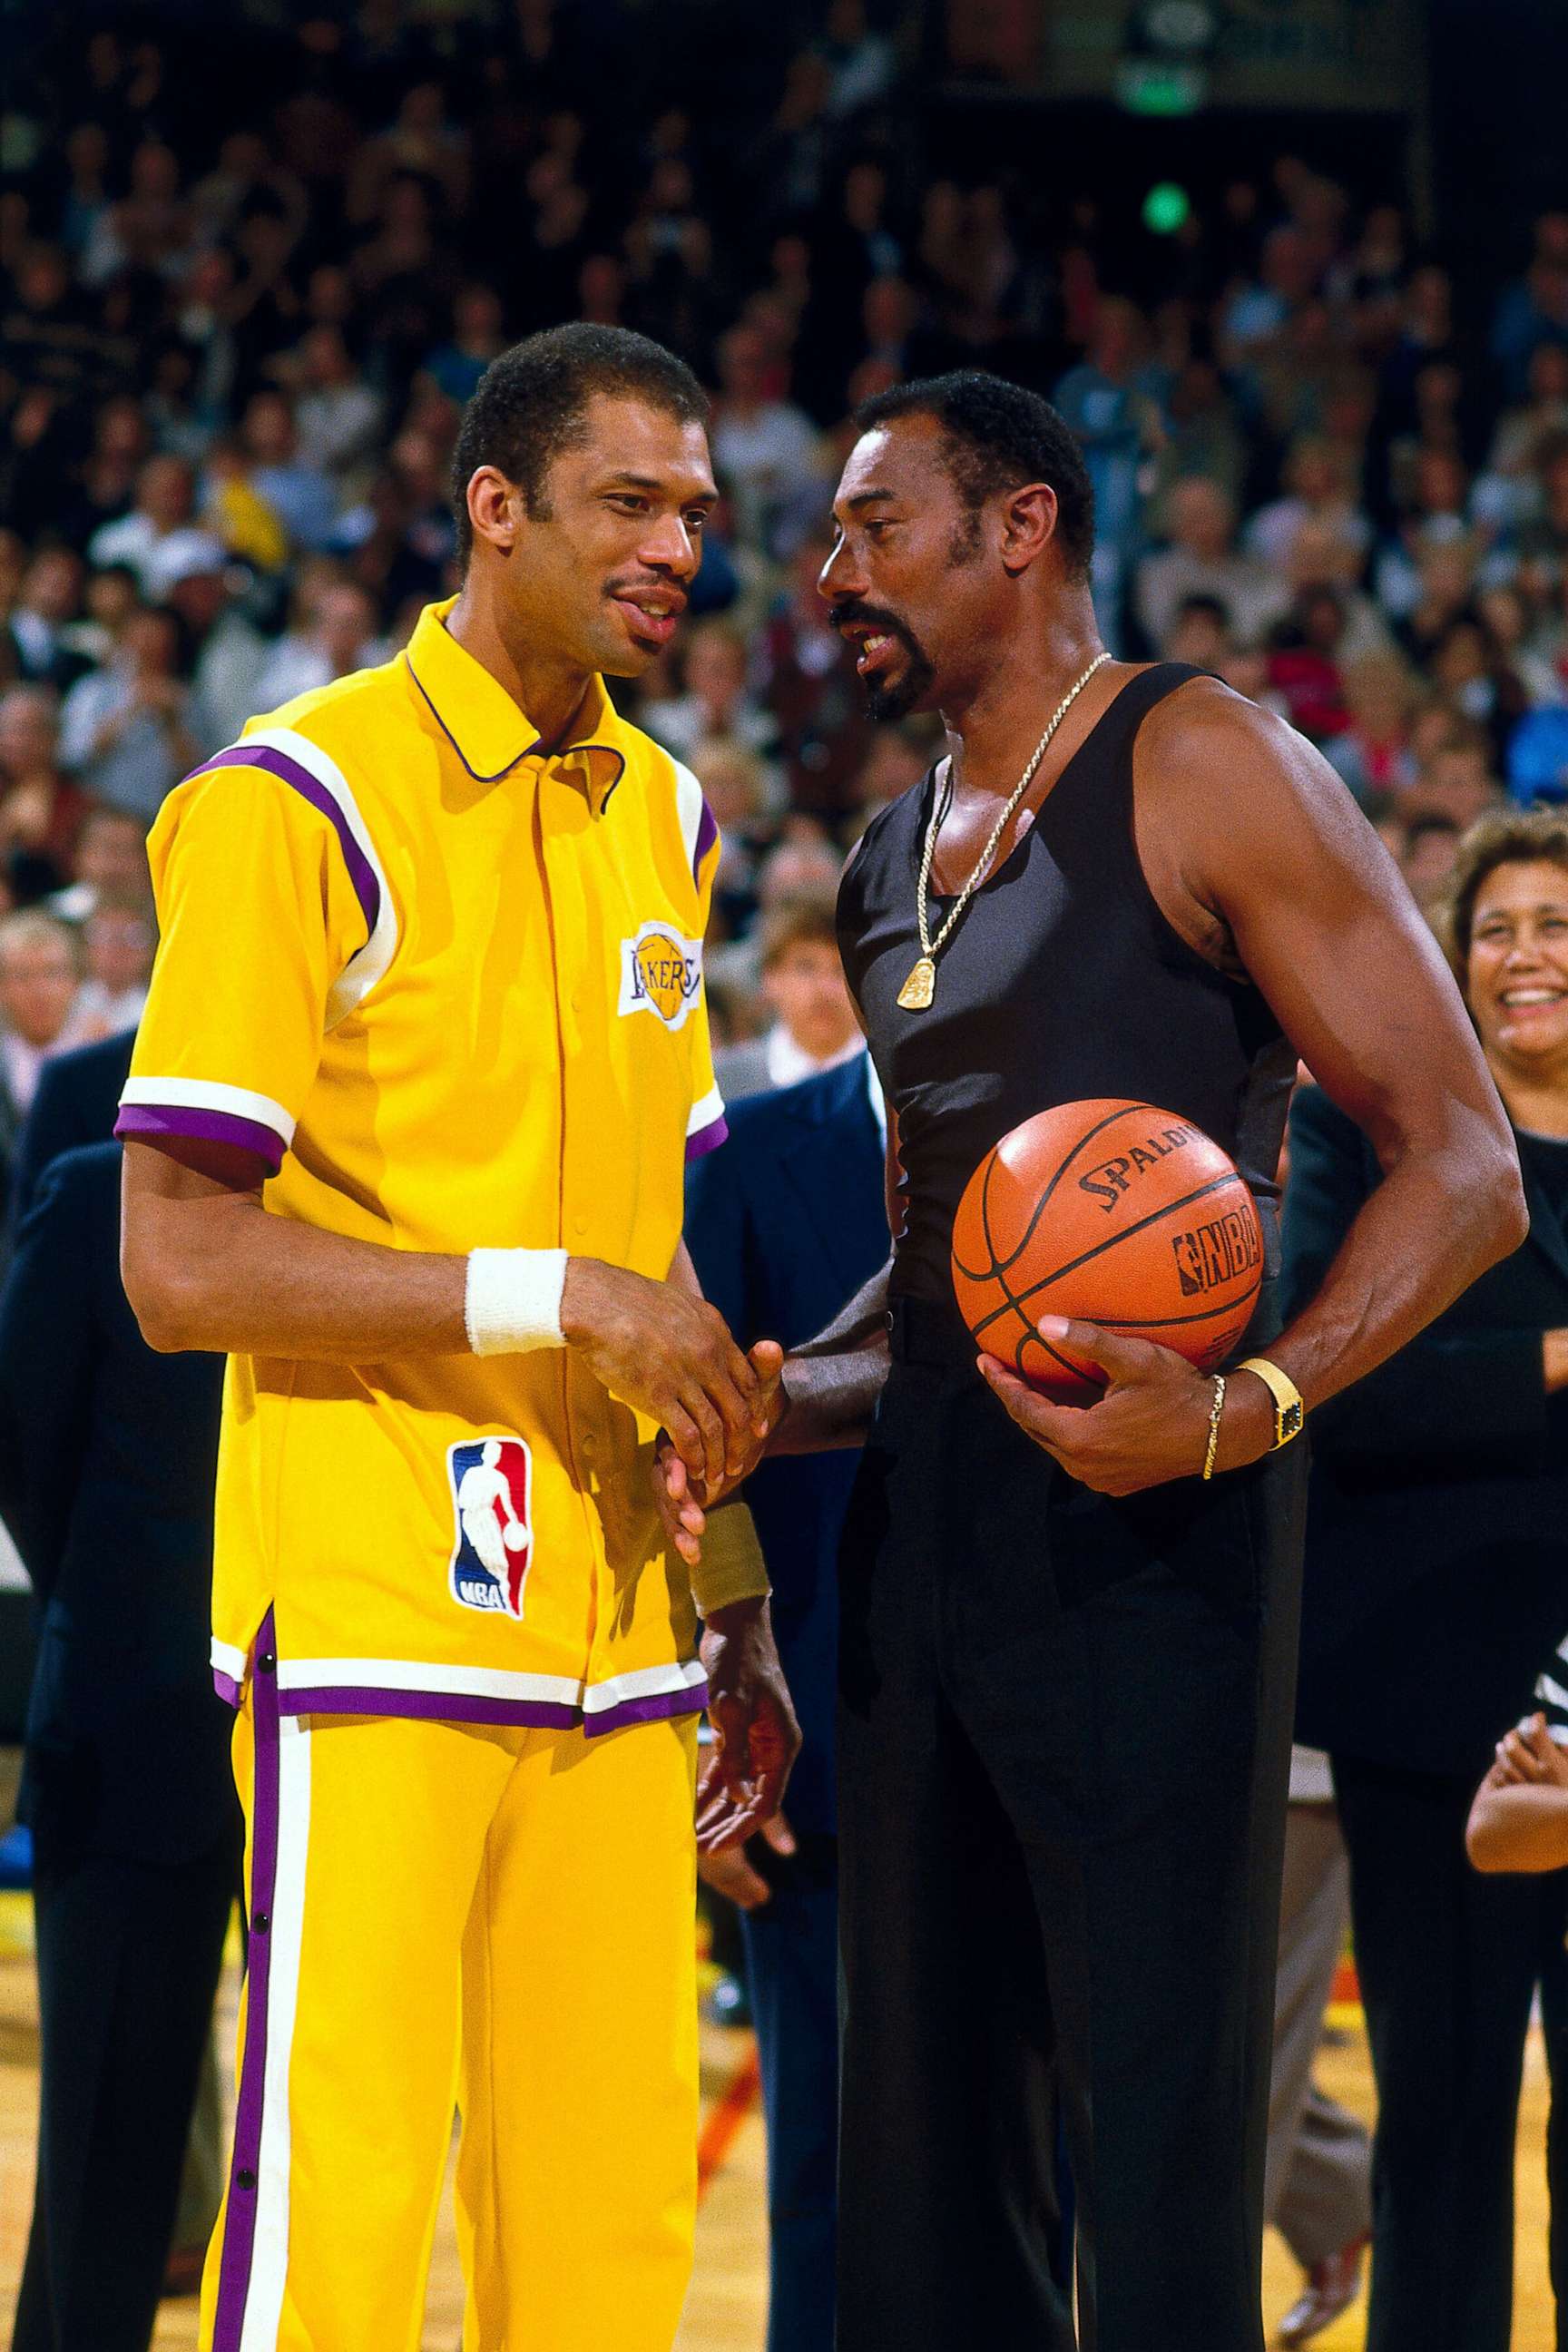 PHOTO: Kareem Abdul Jabbar of the LA Lakers talks with Wilt Chamberlain on the court prior to playing an NBA game against the Kansas City Kings on April 6, 1984 at the Forum in Inglewood, California.